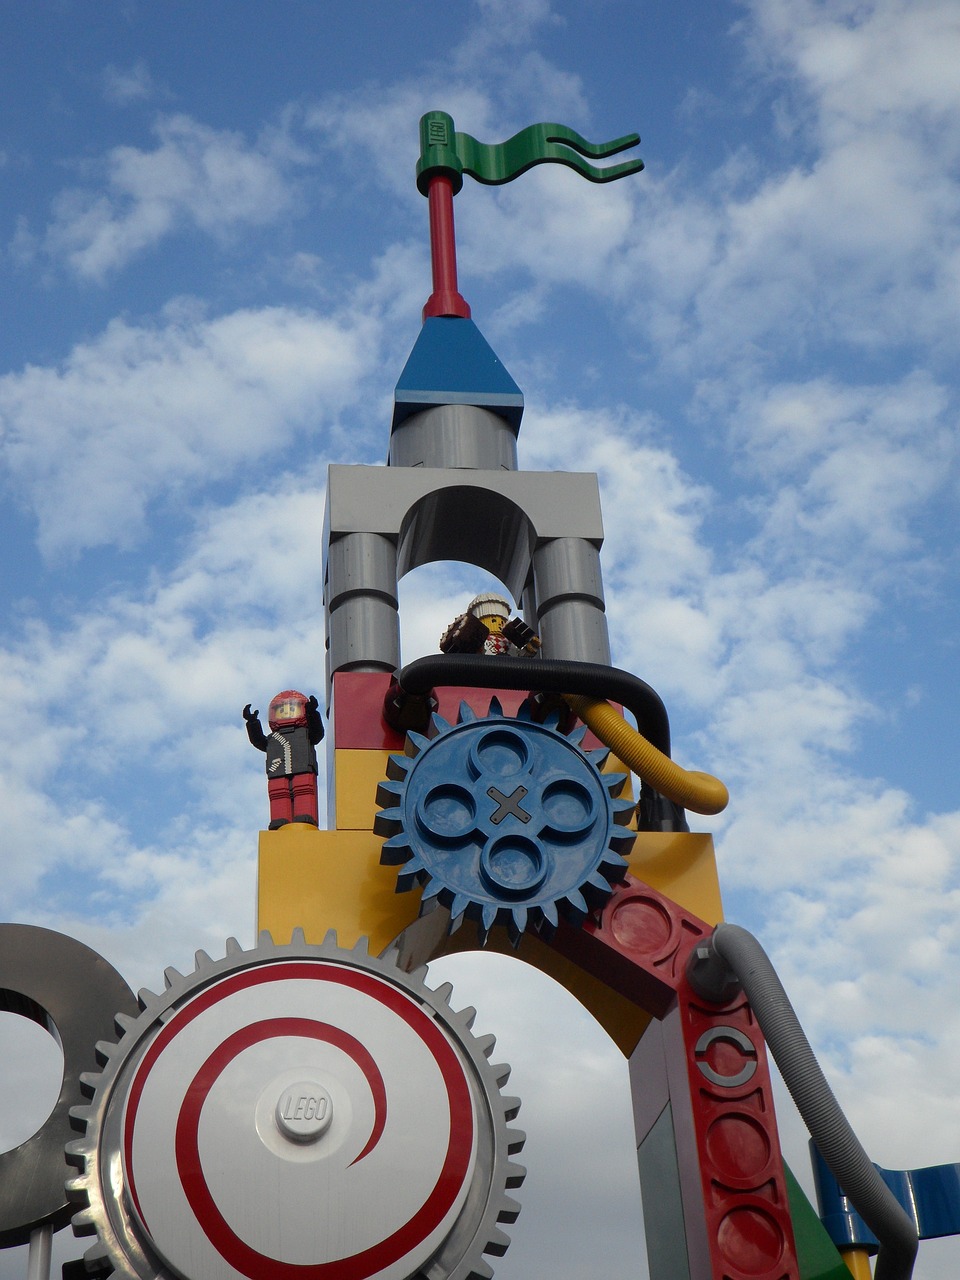 a clock tower with a clock on top of it, inspired by Rube Goldberg, flickr, lego character, digger land amusement park, harajuku, closeup - view